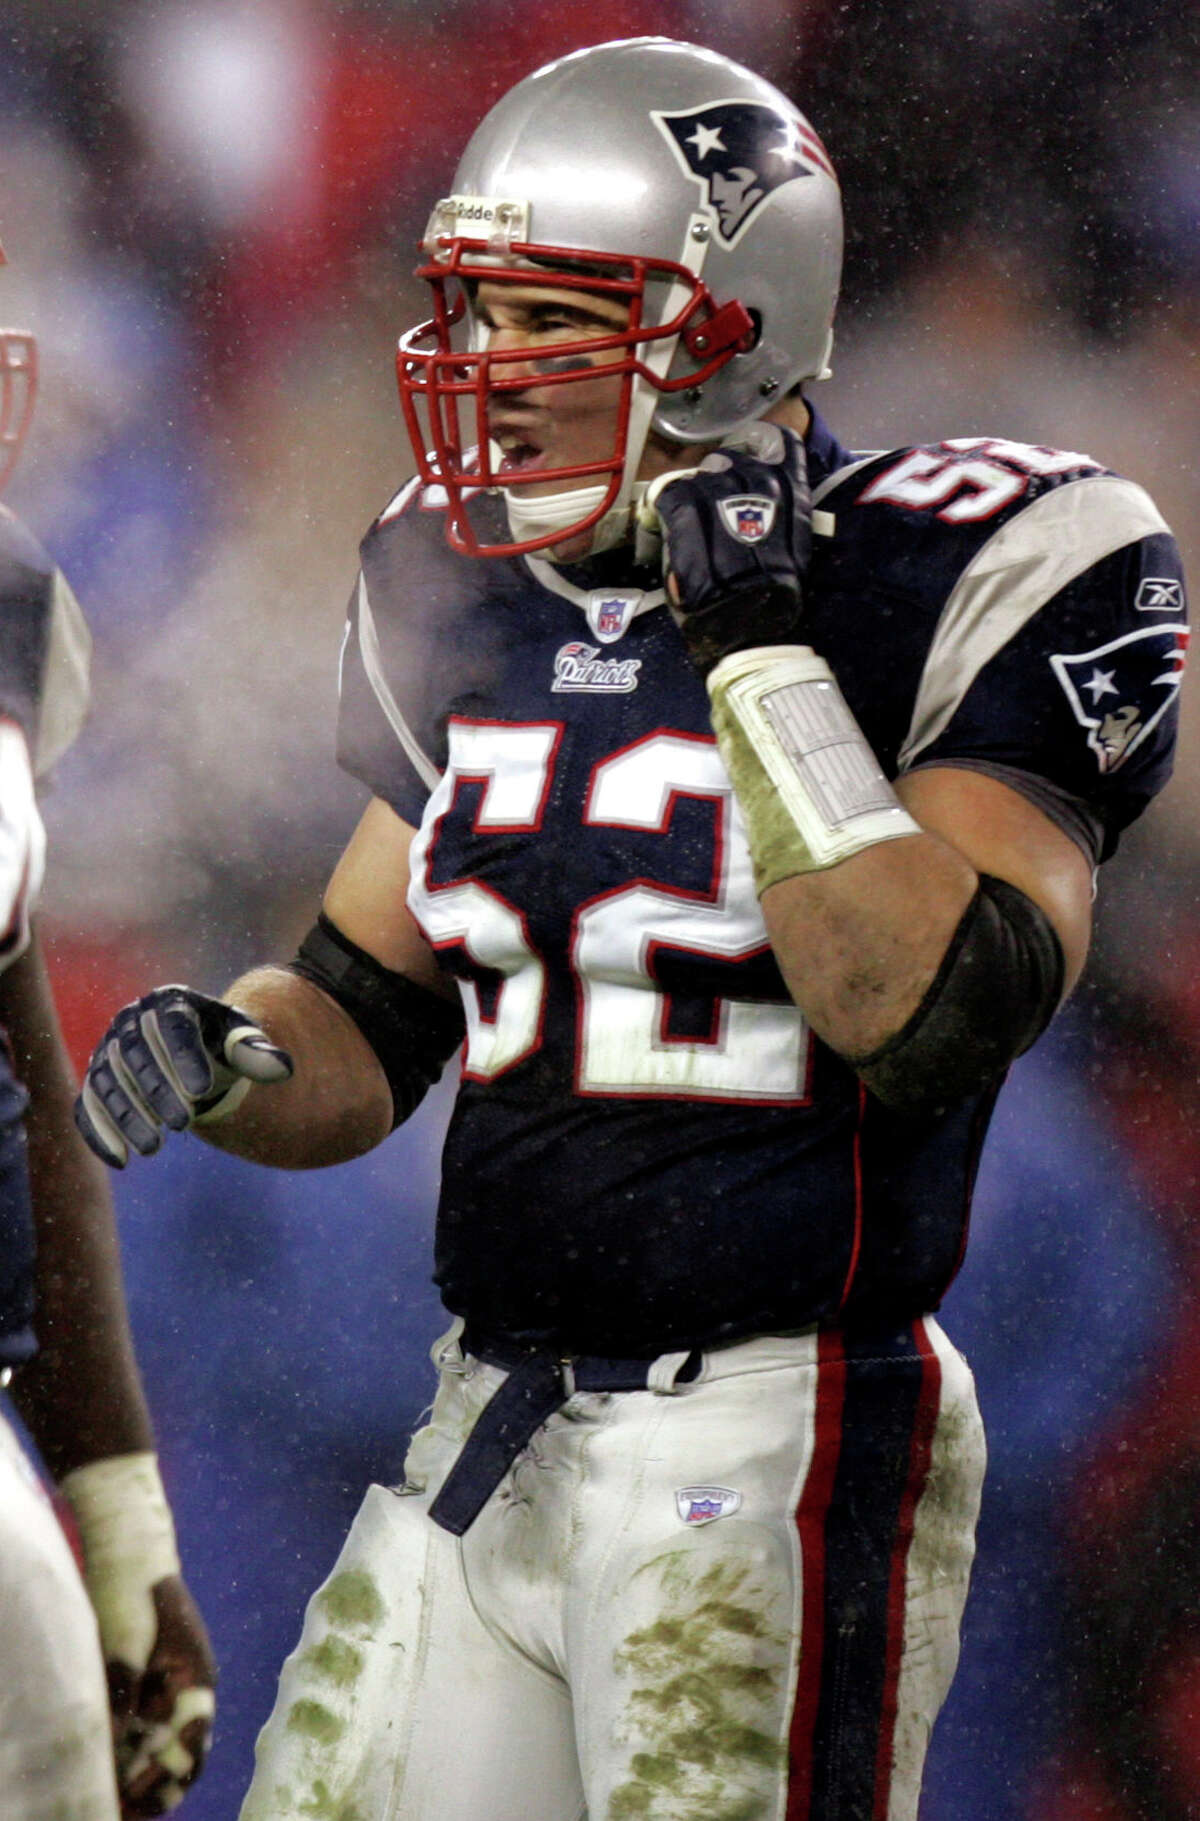 New England Patriots linebacker Ted Johnson looks on during the AFC divisional playoff game against the Indianapolis Colts in this Jan. 16, 2005 file photo, in Foxboro, Mass. (AP Photo/Michael Dwyer)